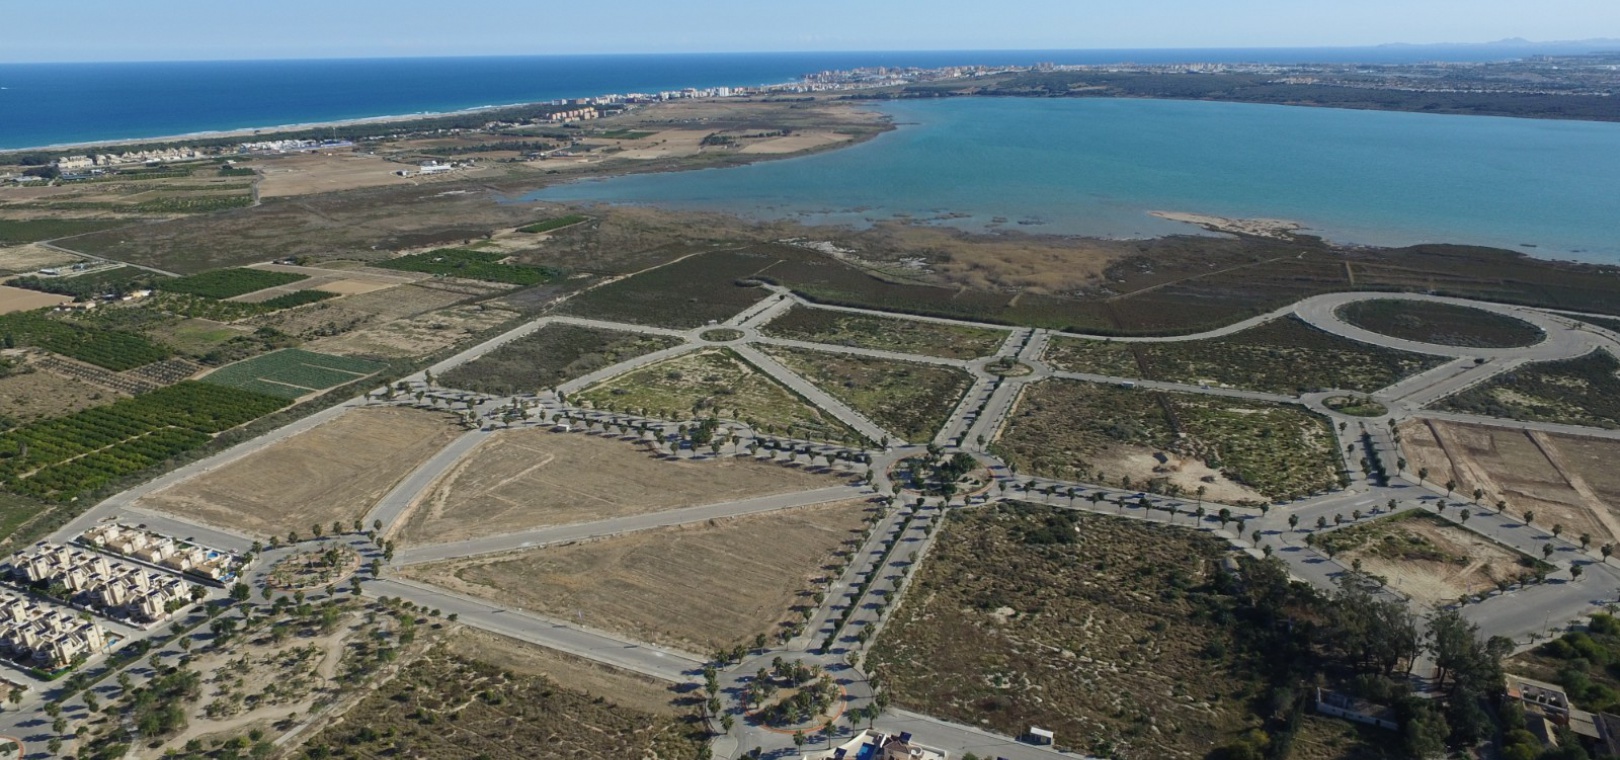 Costa blanca new build apartments for sale